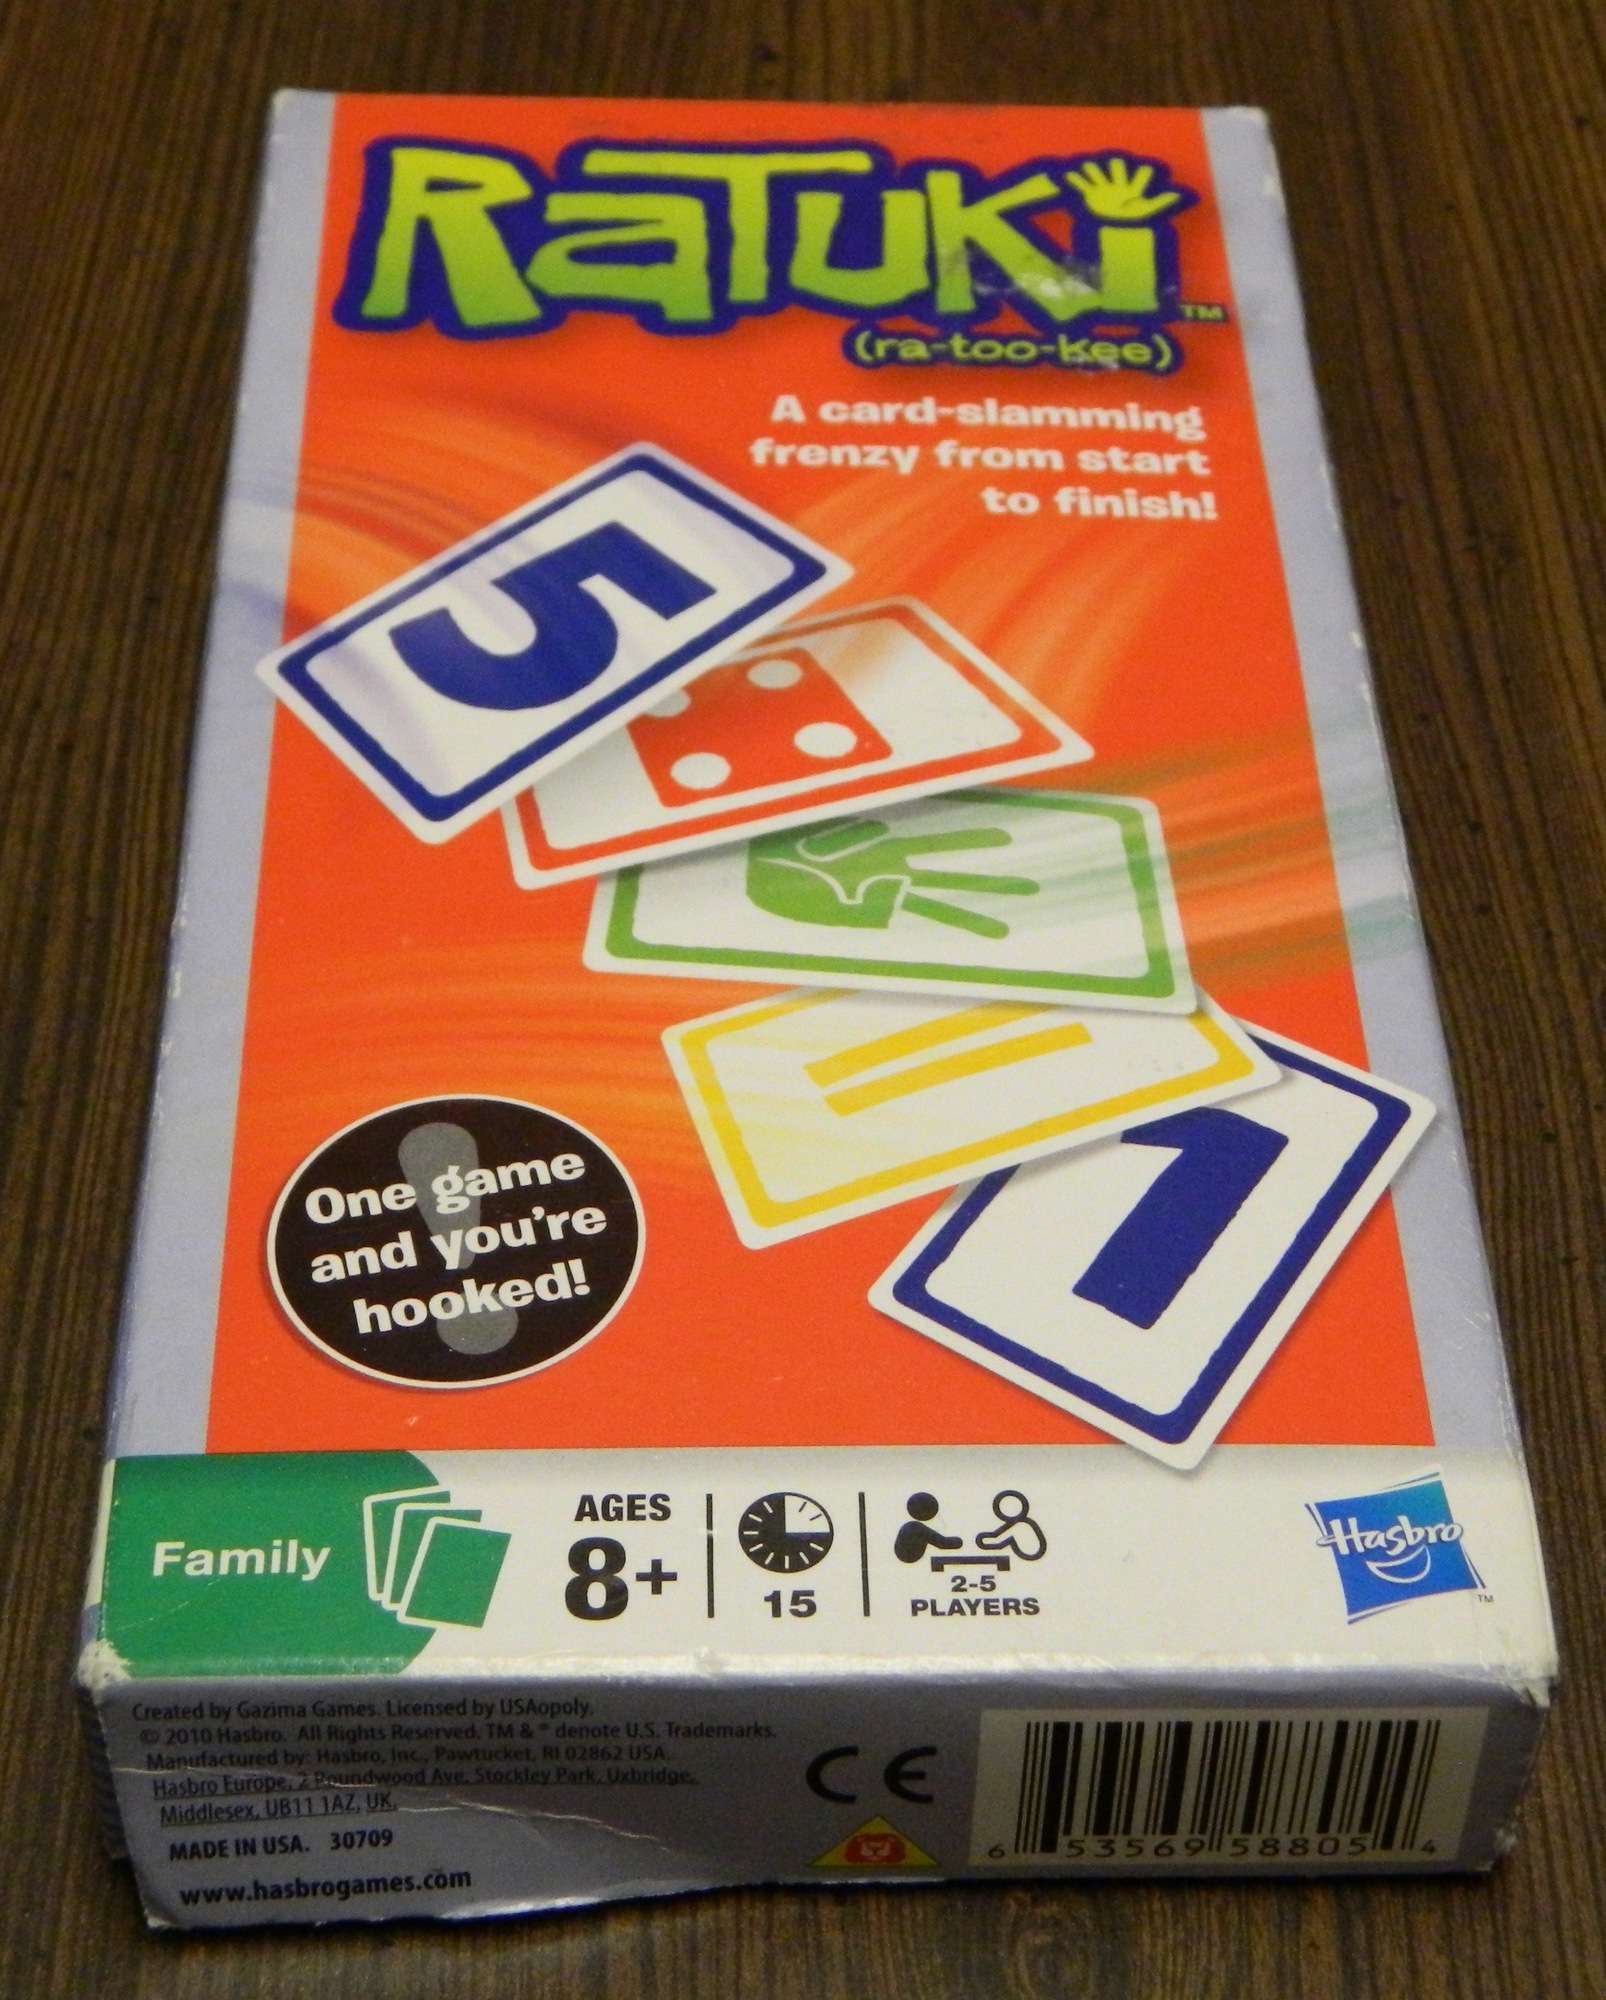 Ratuki Card Game Review and Instructions | Geeky Hobbies